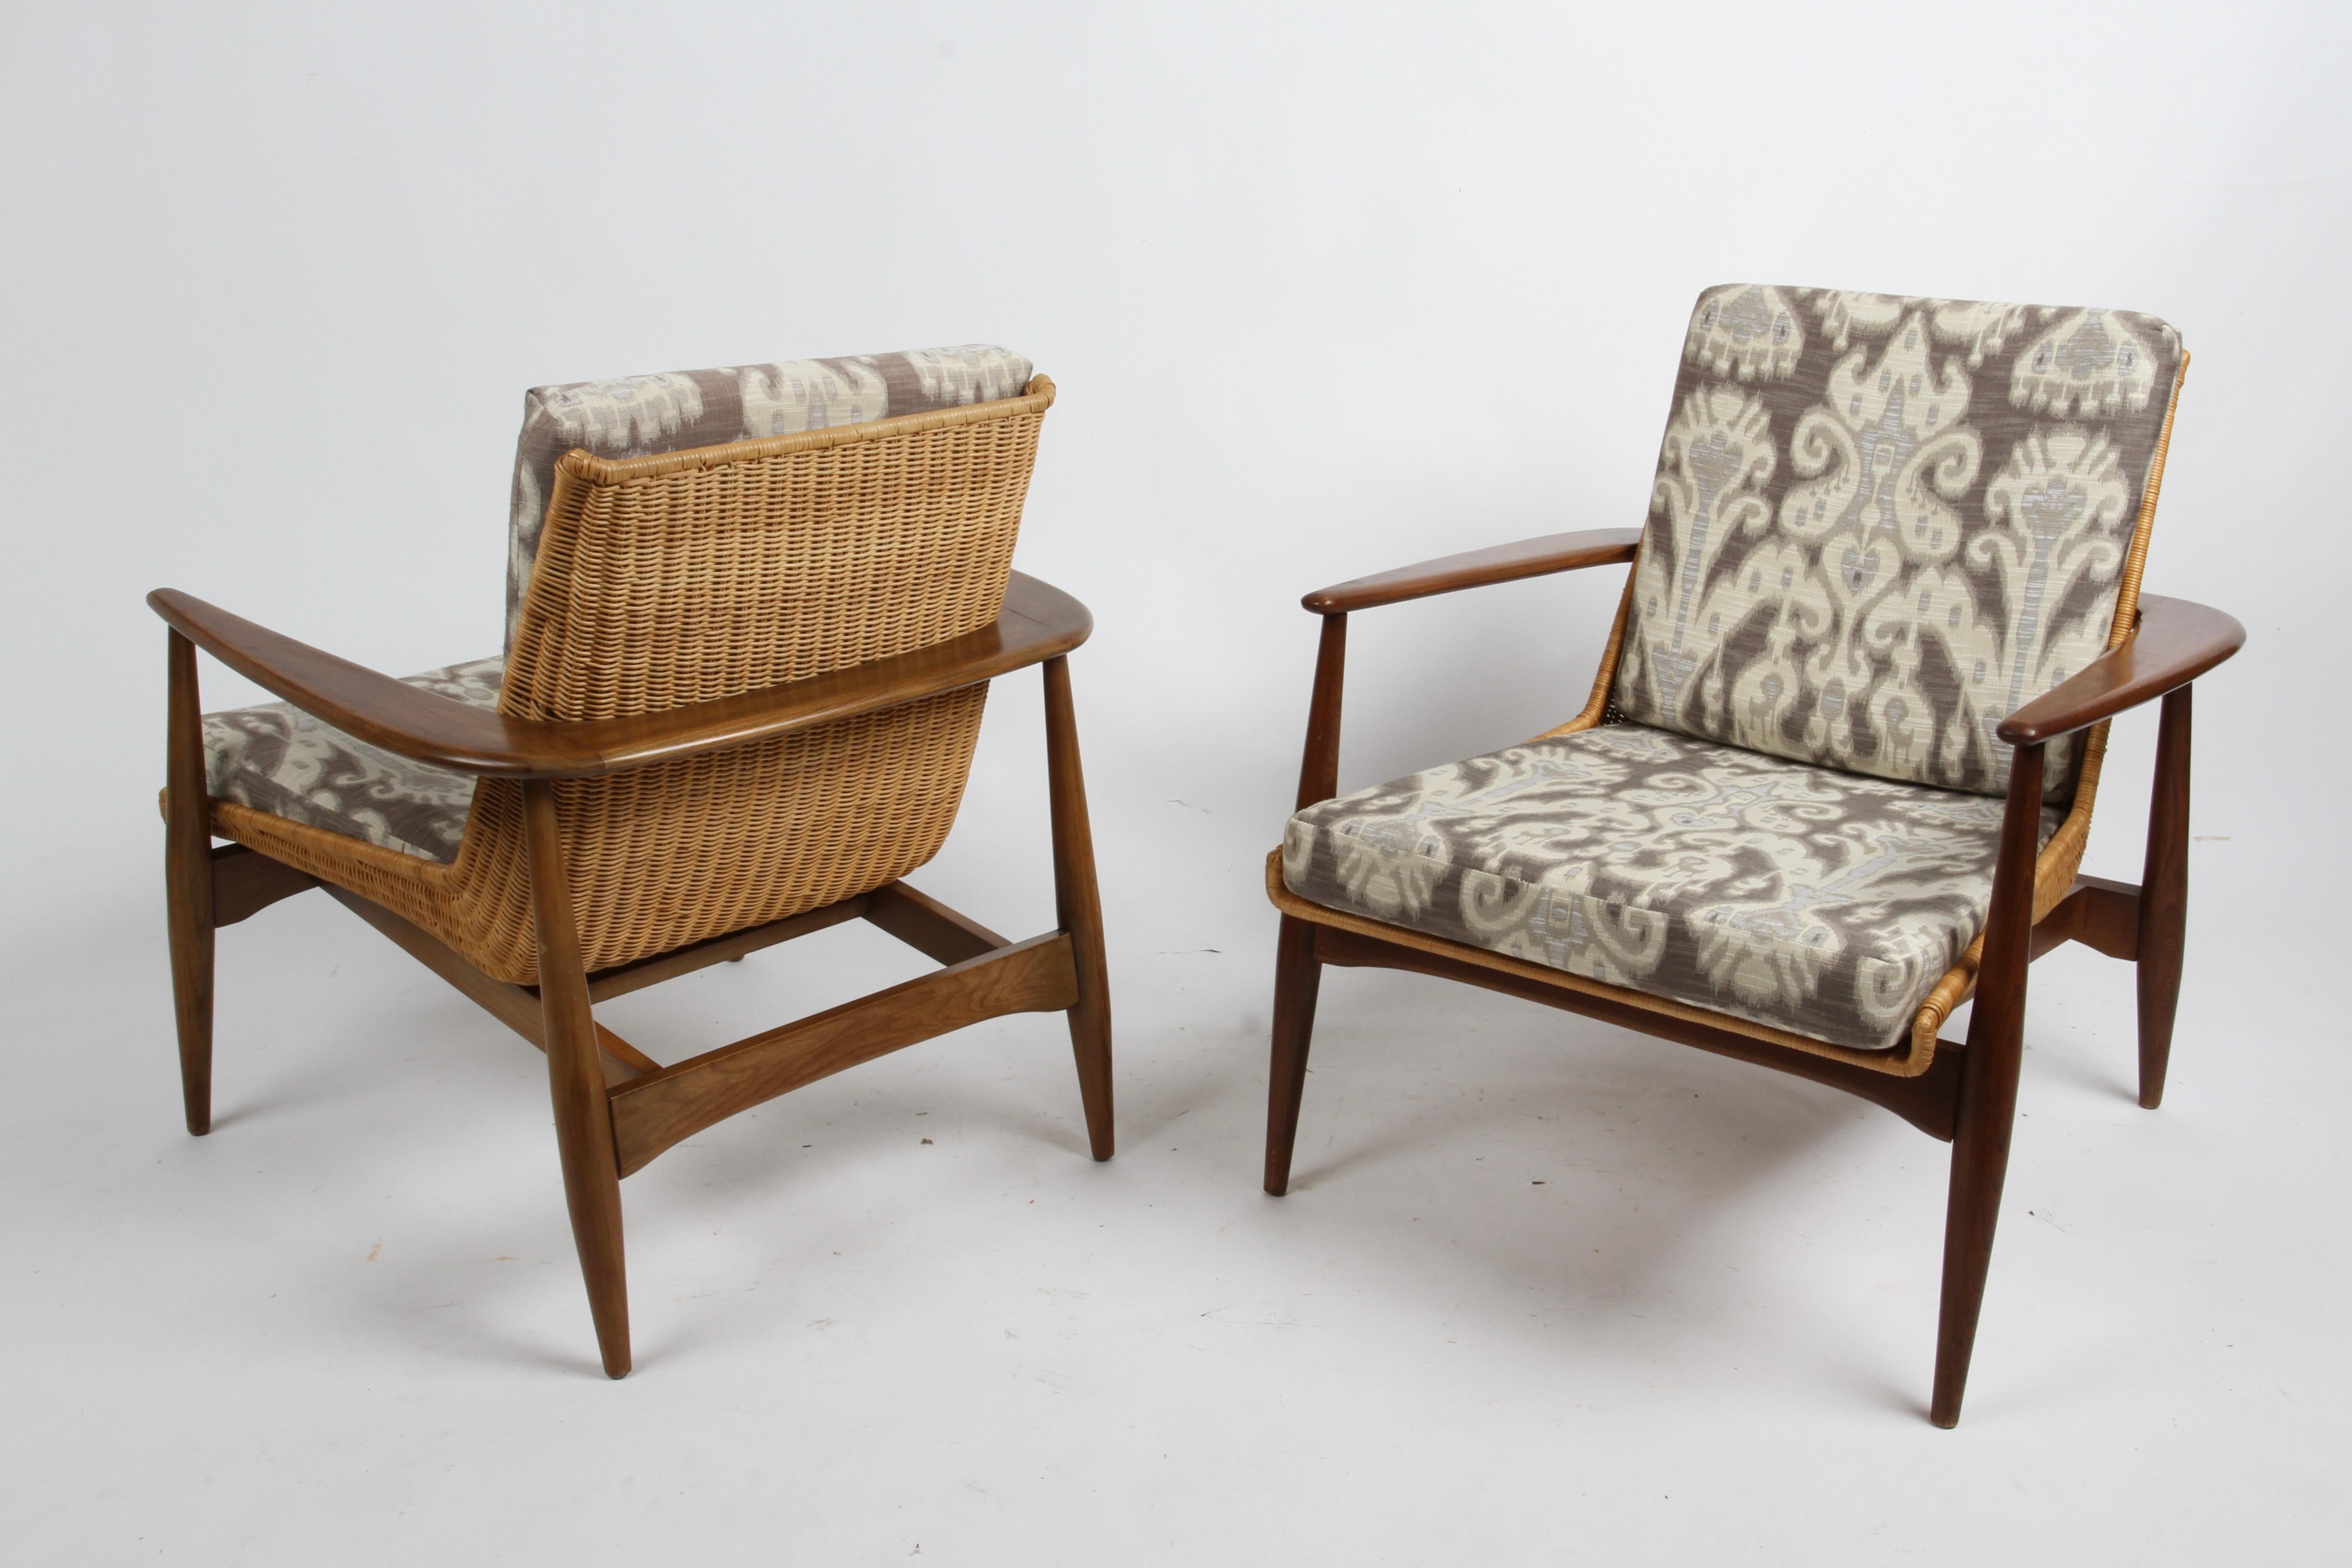 Mid-Century Modern Rare Pair of Lawrence Peabody's Sculptural 1806 / 917 Chairs in Walnut & Rattan